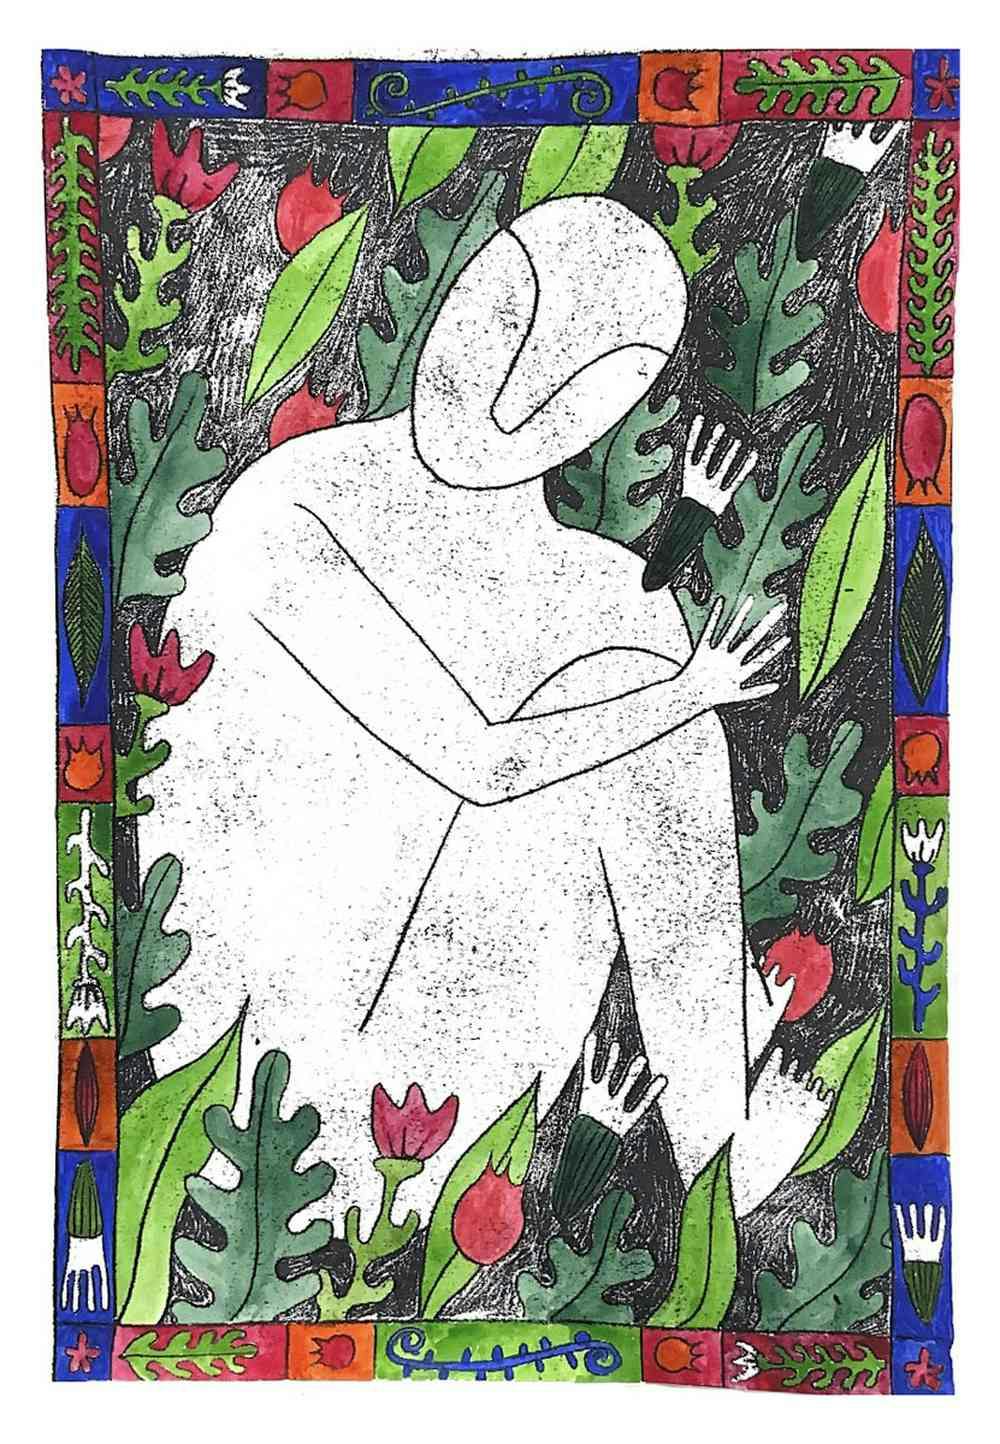 A hand drawing of a white figure sat down surrounded by green leaves and red tulips. The drawing has a blue, red and green border with flower and leaf patterns.